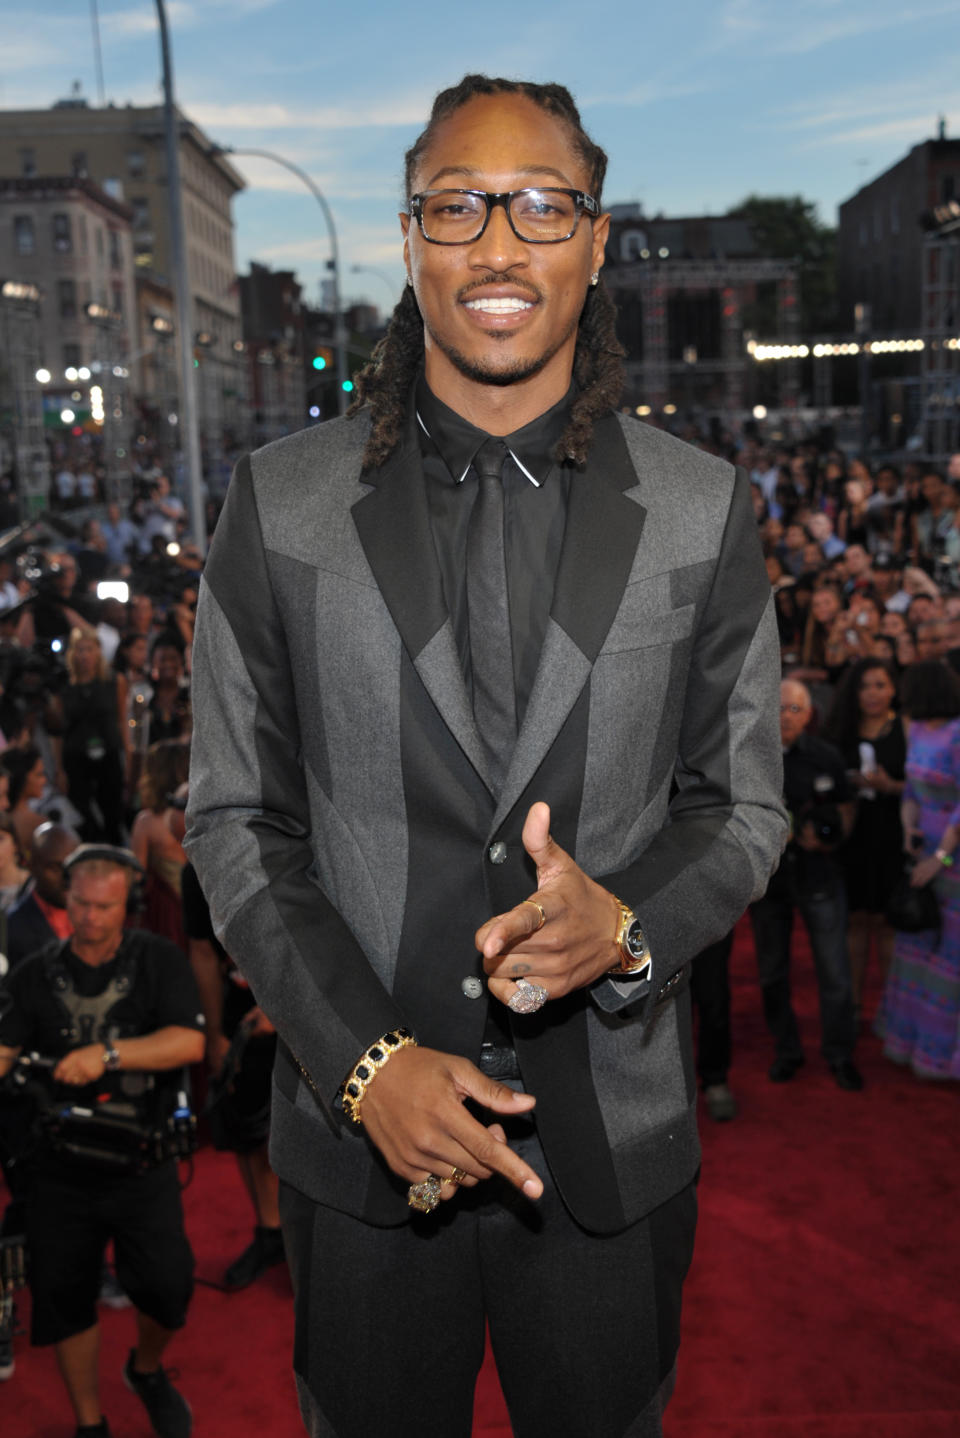 FILE - In this Aug. 25, 2013 file photo provided by MTV, Future arrives at the MTV Video Music Awards at Barclays Center in the Brooklyn borough of New York. Future thinks his new star-laden album "Honest" is a time capsule. "This album isn't even about the hits, it's about the moments," Future said in an interview in March 2014. (AP Photo/MTV, John Shearer, file)